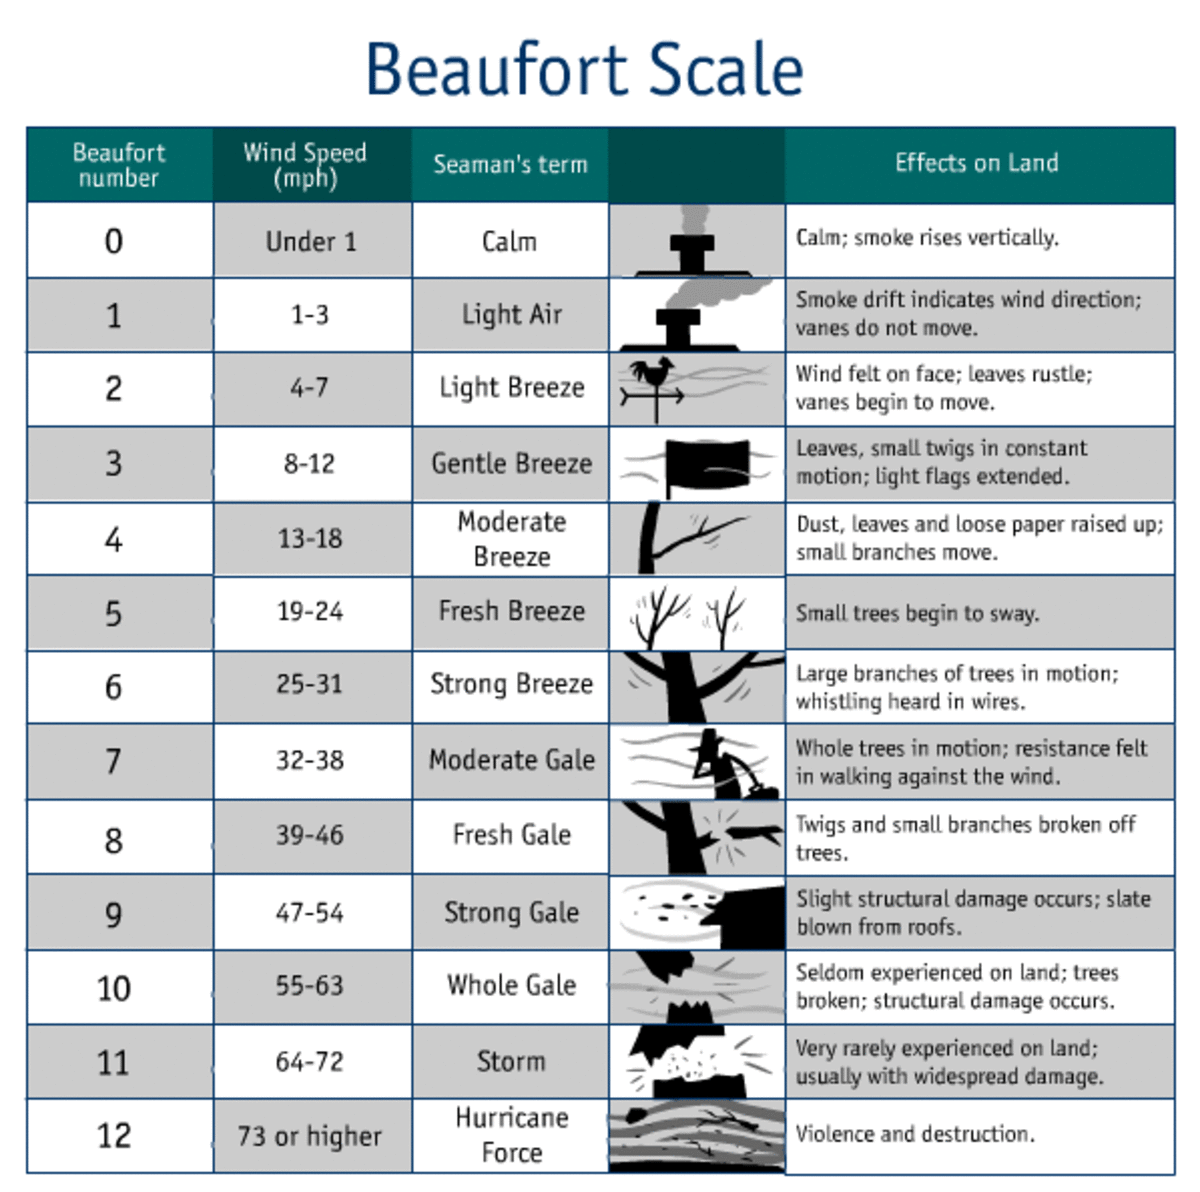 The Beaufort scale for Wind speed